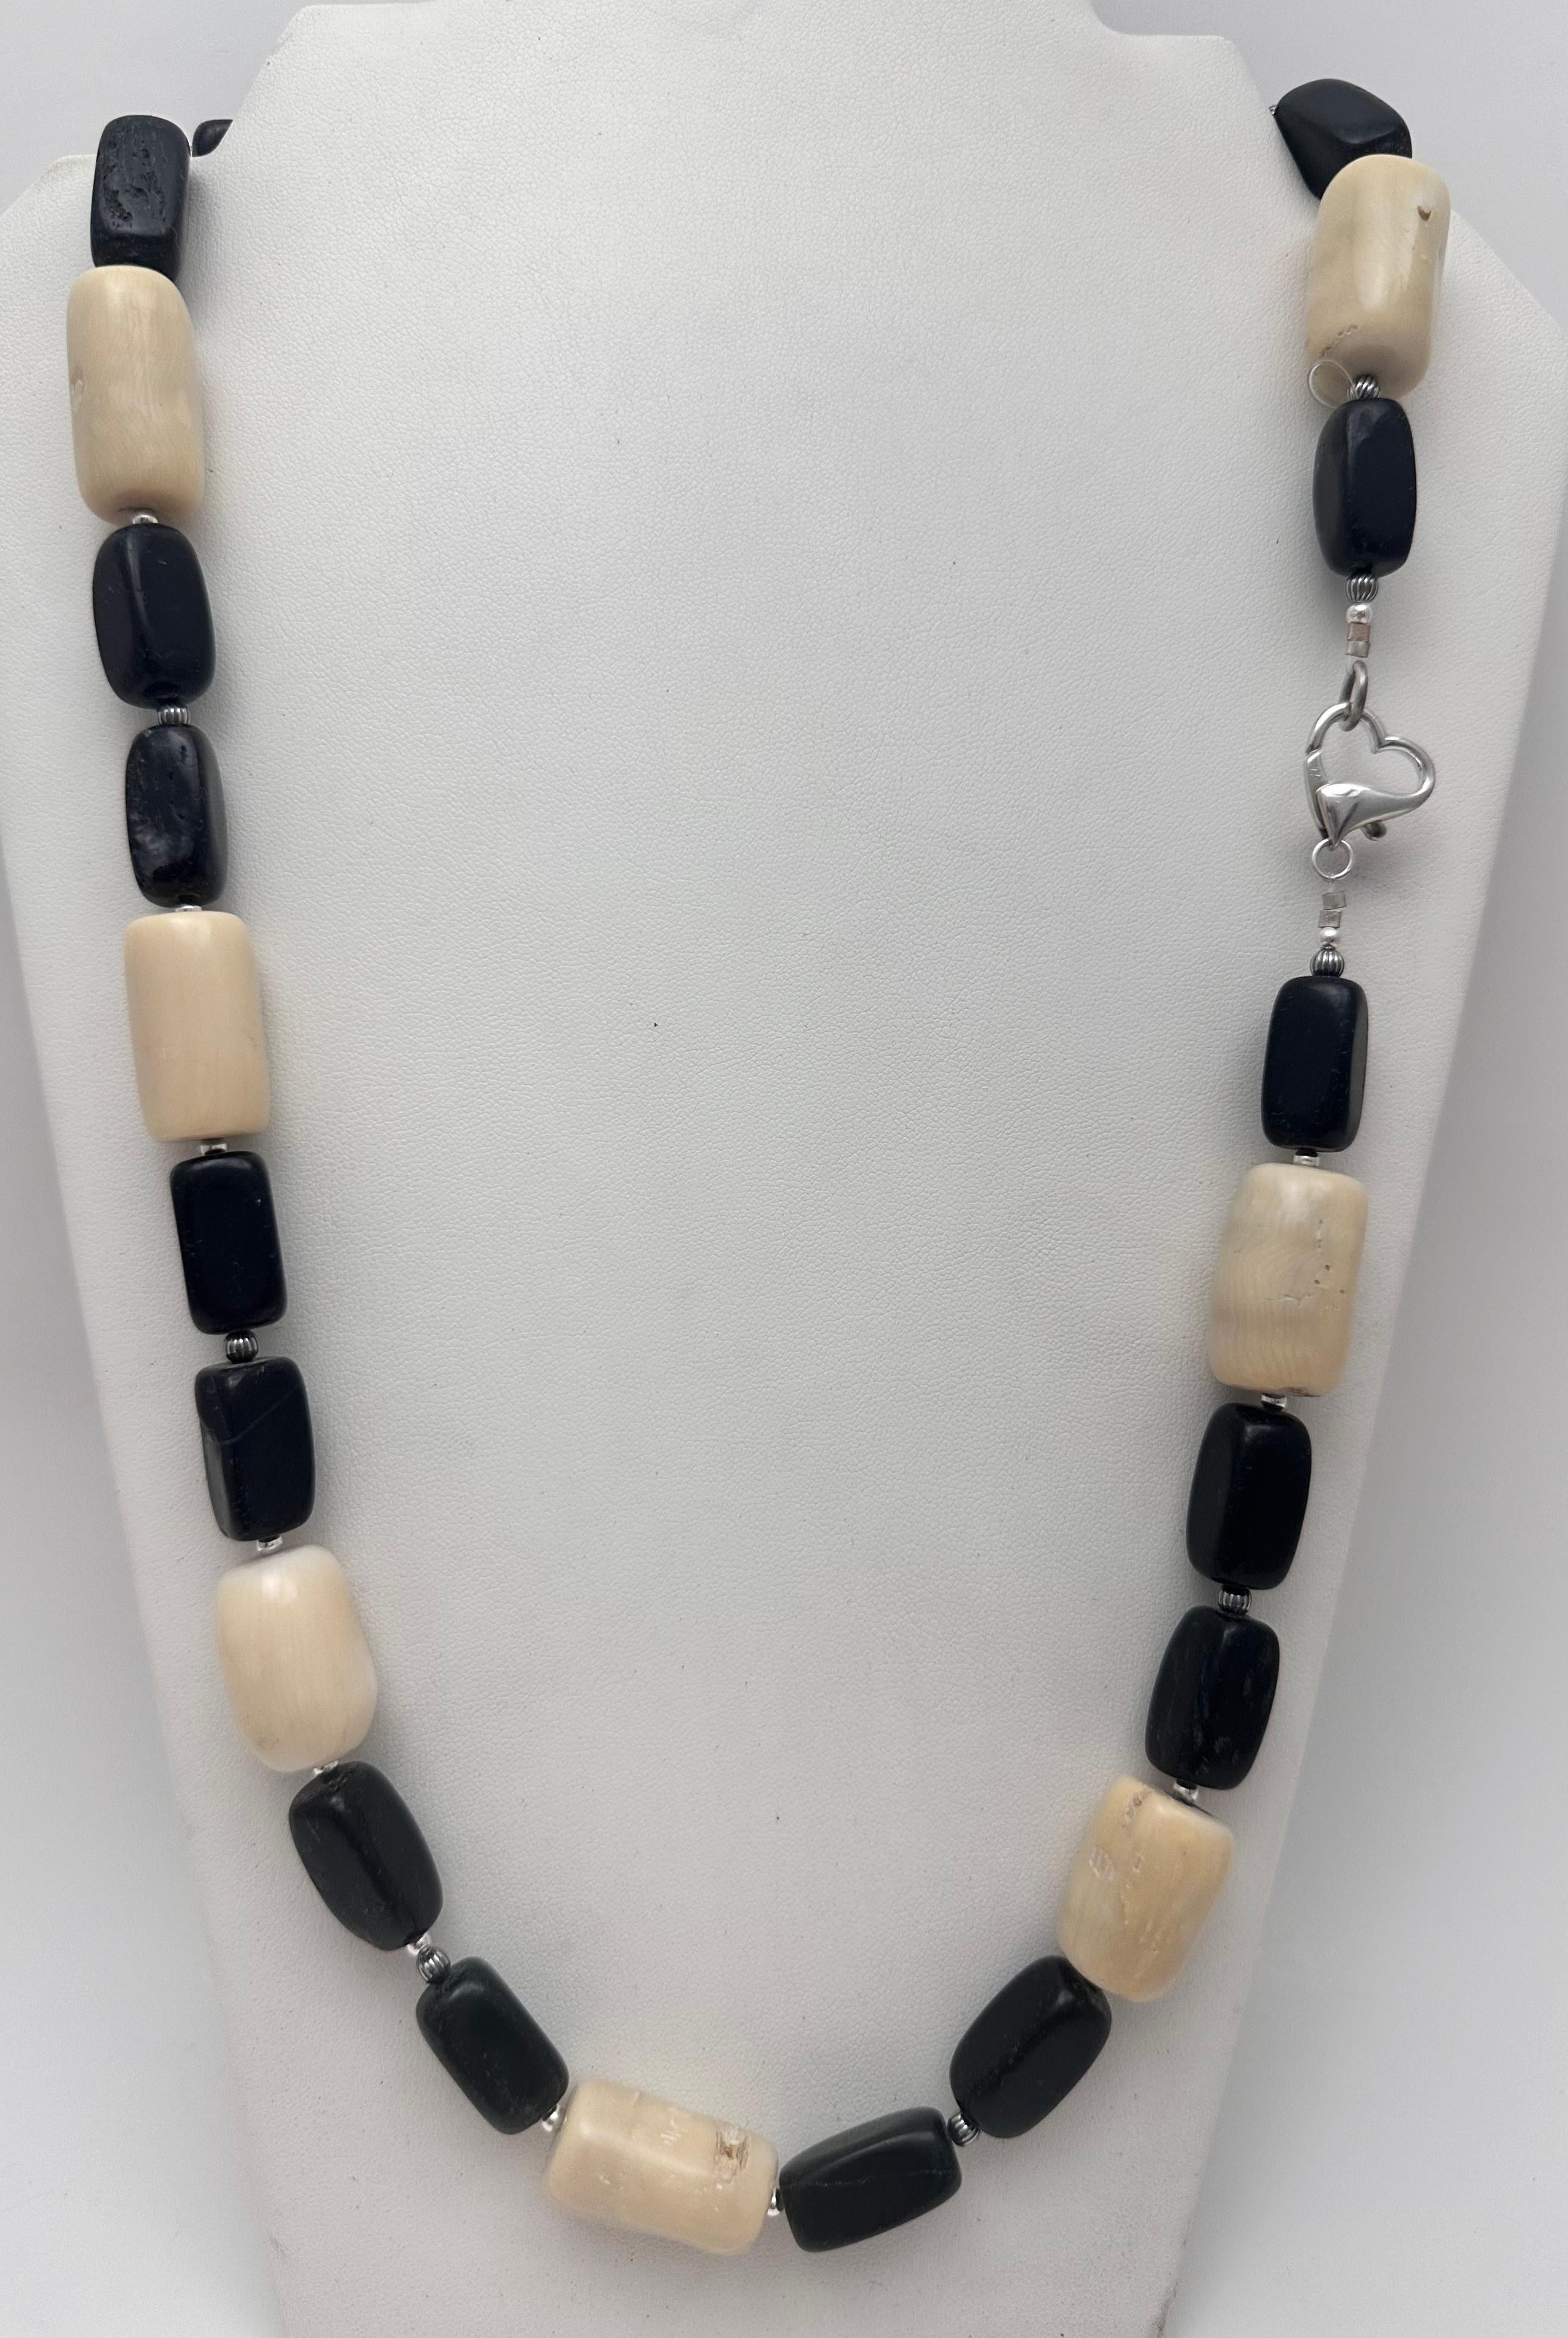 This beautiful handmade necklace is crafted from high-quality sterling silver (.925) and features a gorgeous beige barrel coral beads. The necklace is adorned with black beaded accents and has a heart shape lobster clasp. The necklace measures 28